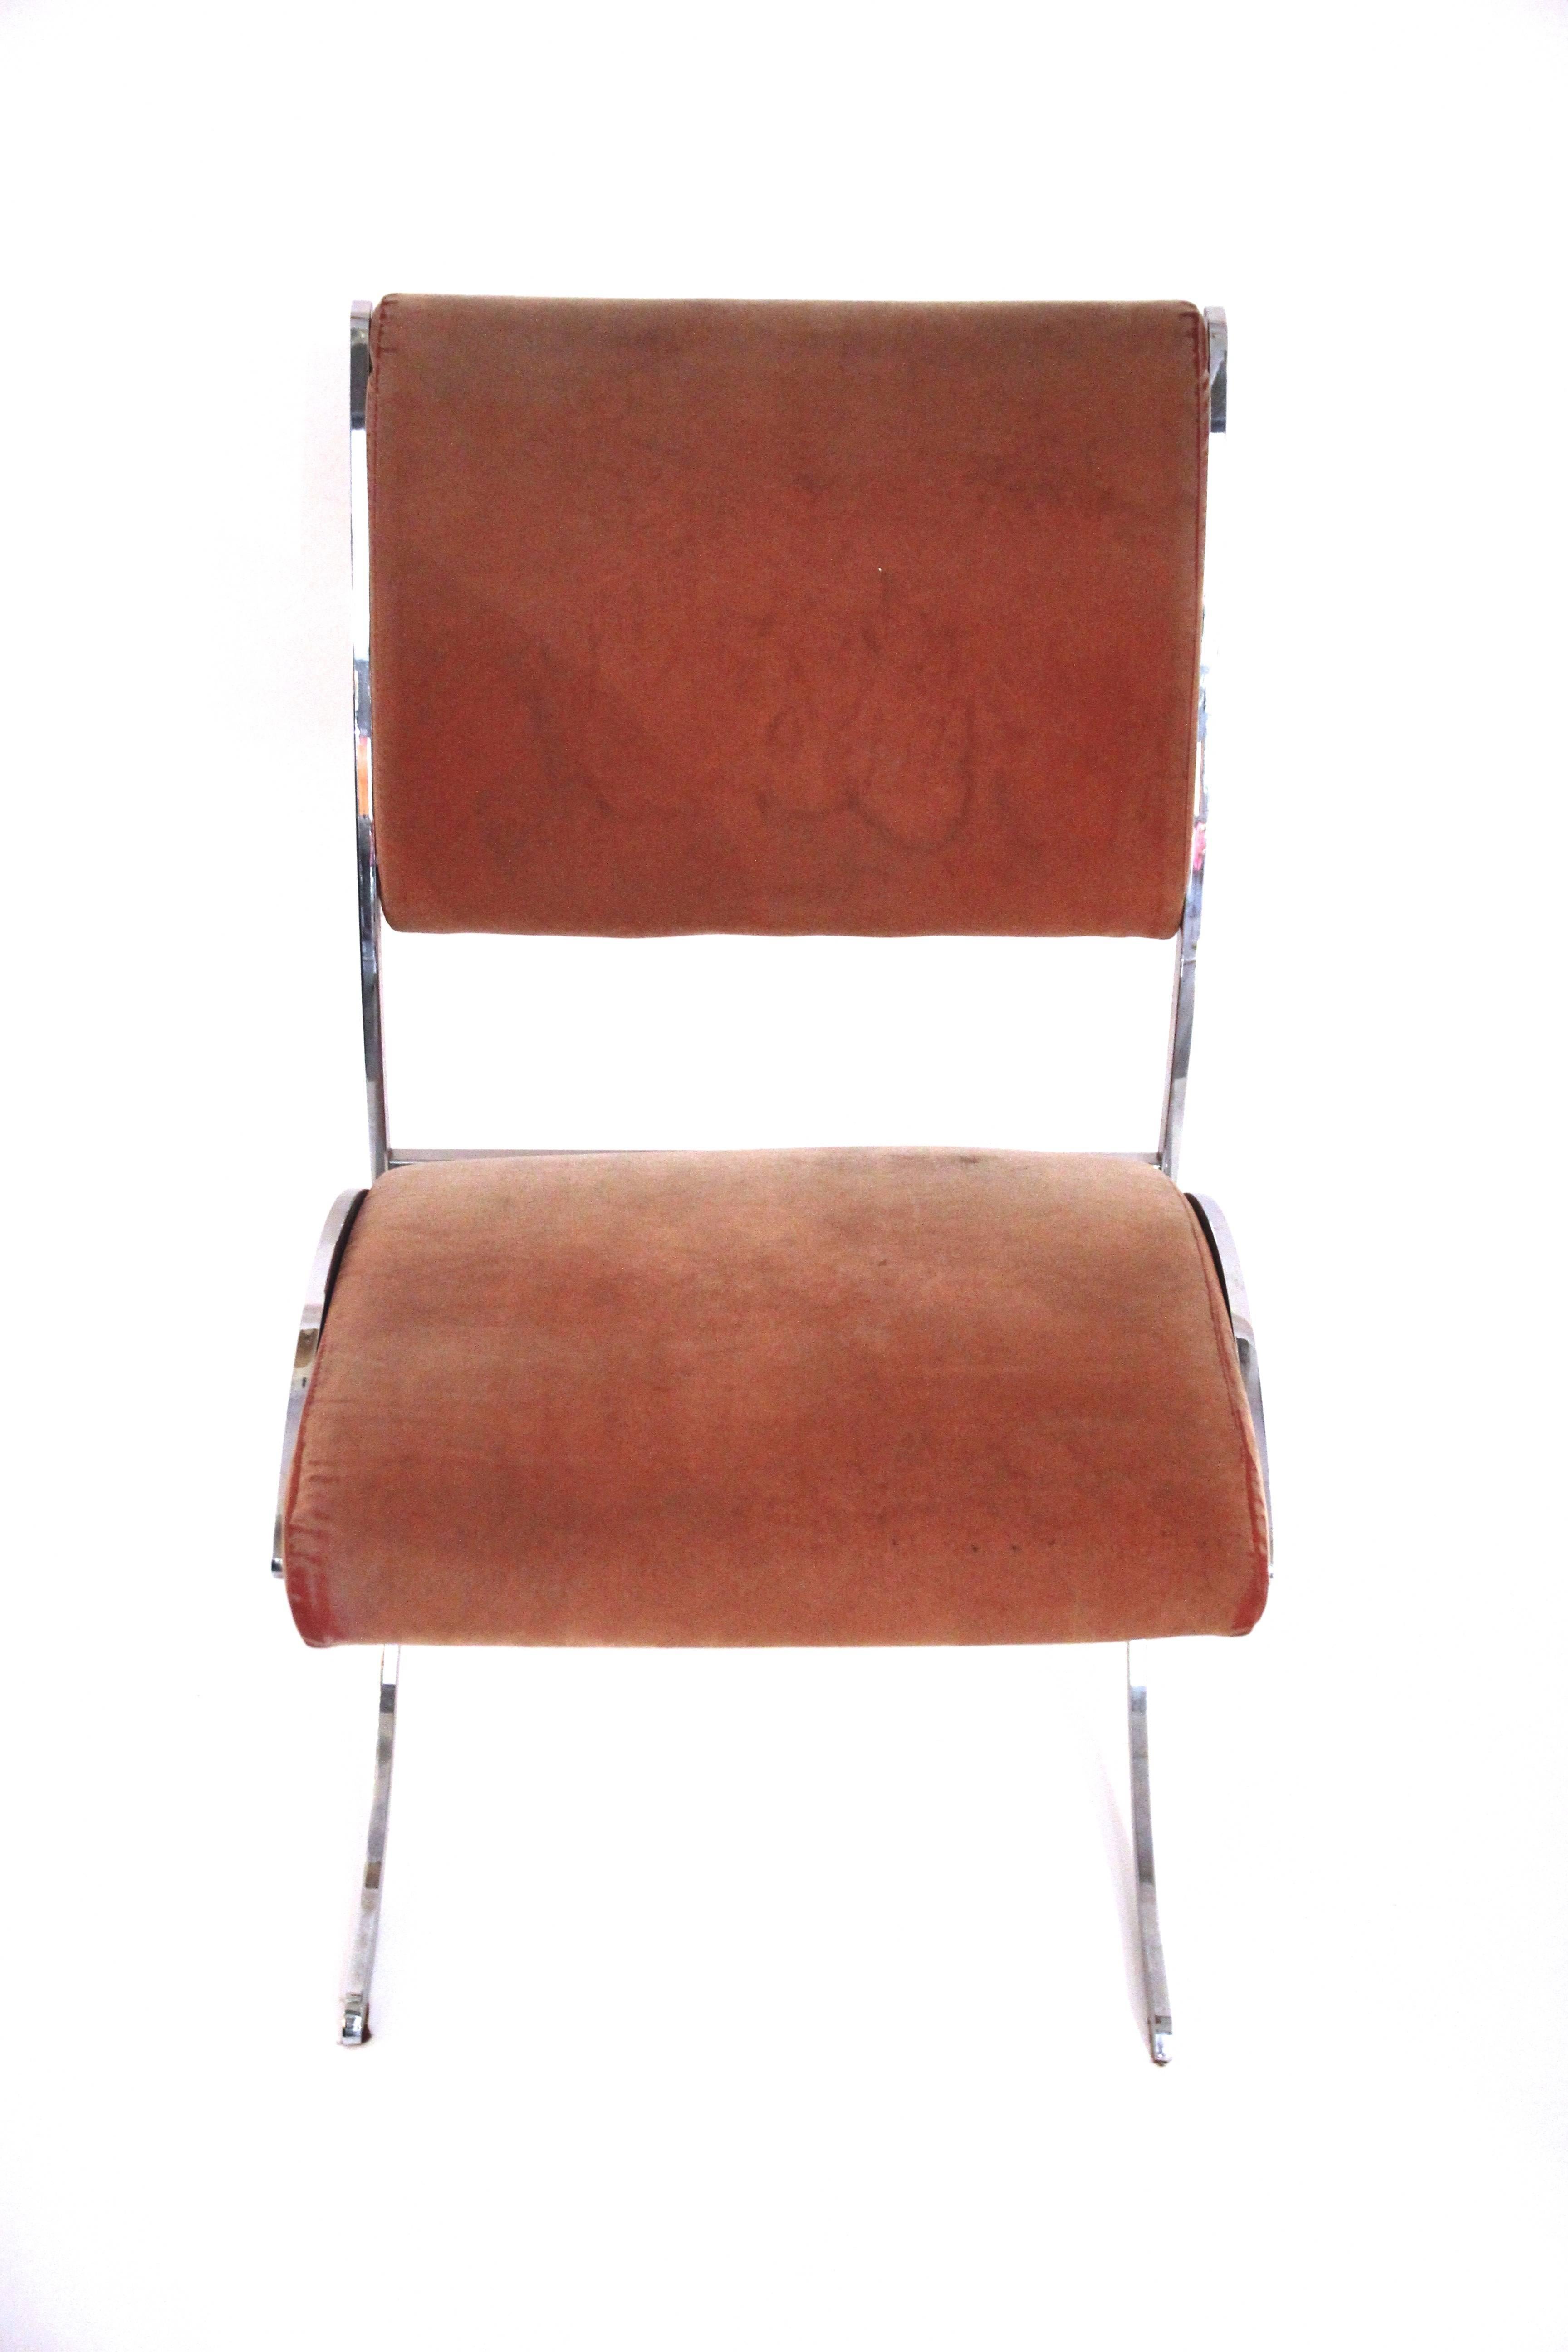 Maison Jansen,
suite of six chairs,
structure in metal and seat in original textile,
circa 1960, France.
Measures: Height 82 cm, seat height 47 cm,
Width 44 cm, depth 60 cm.